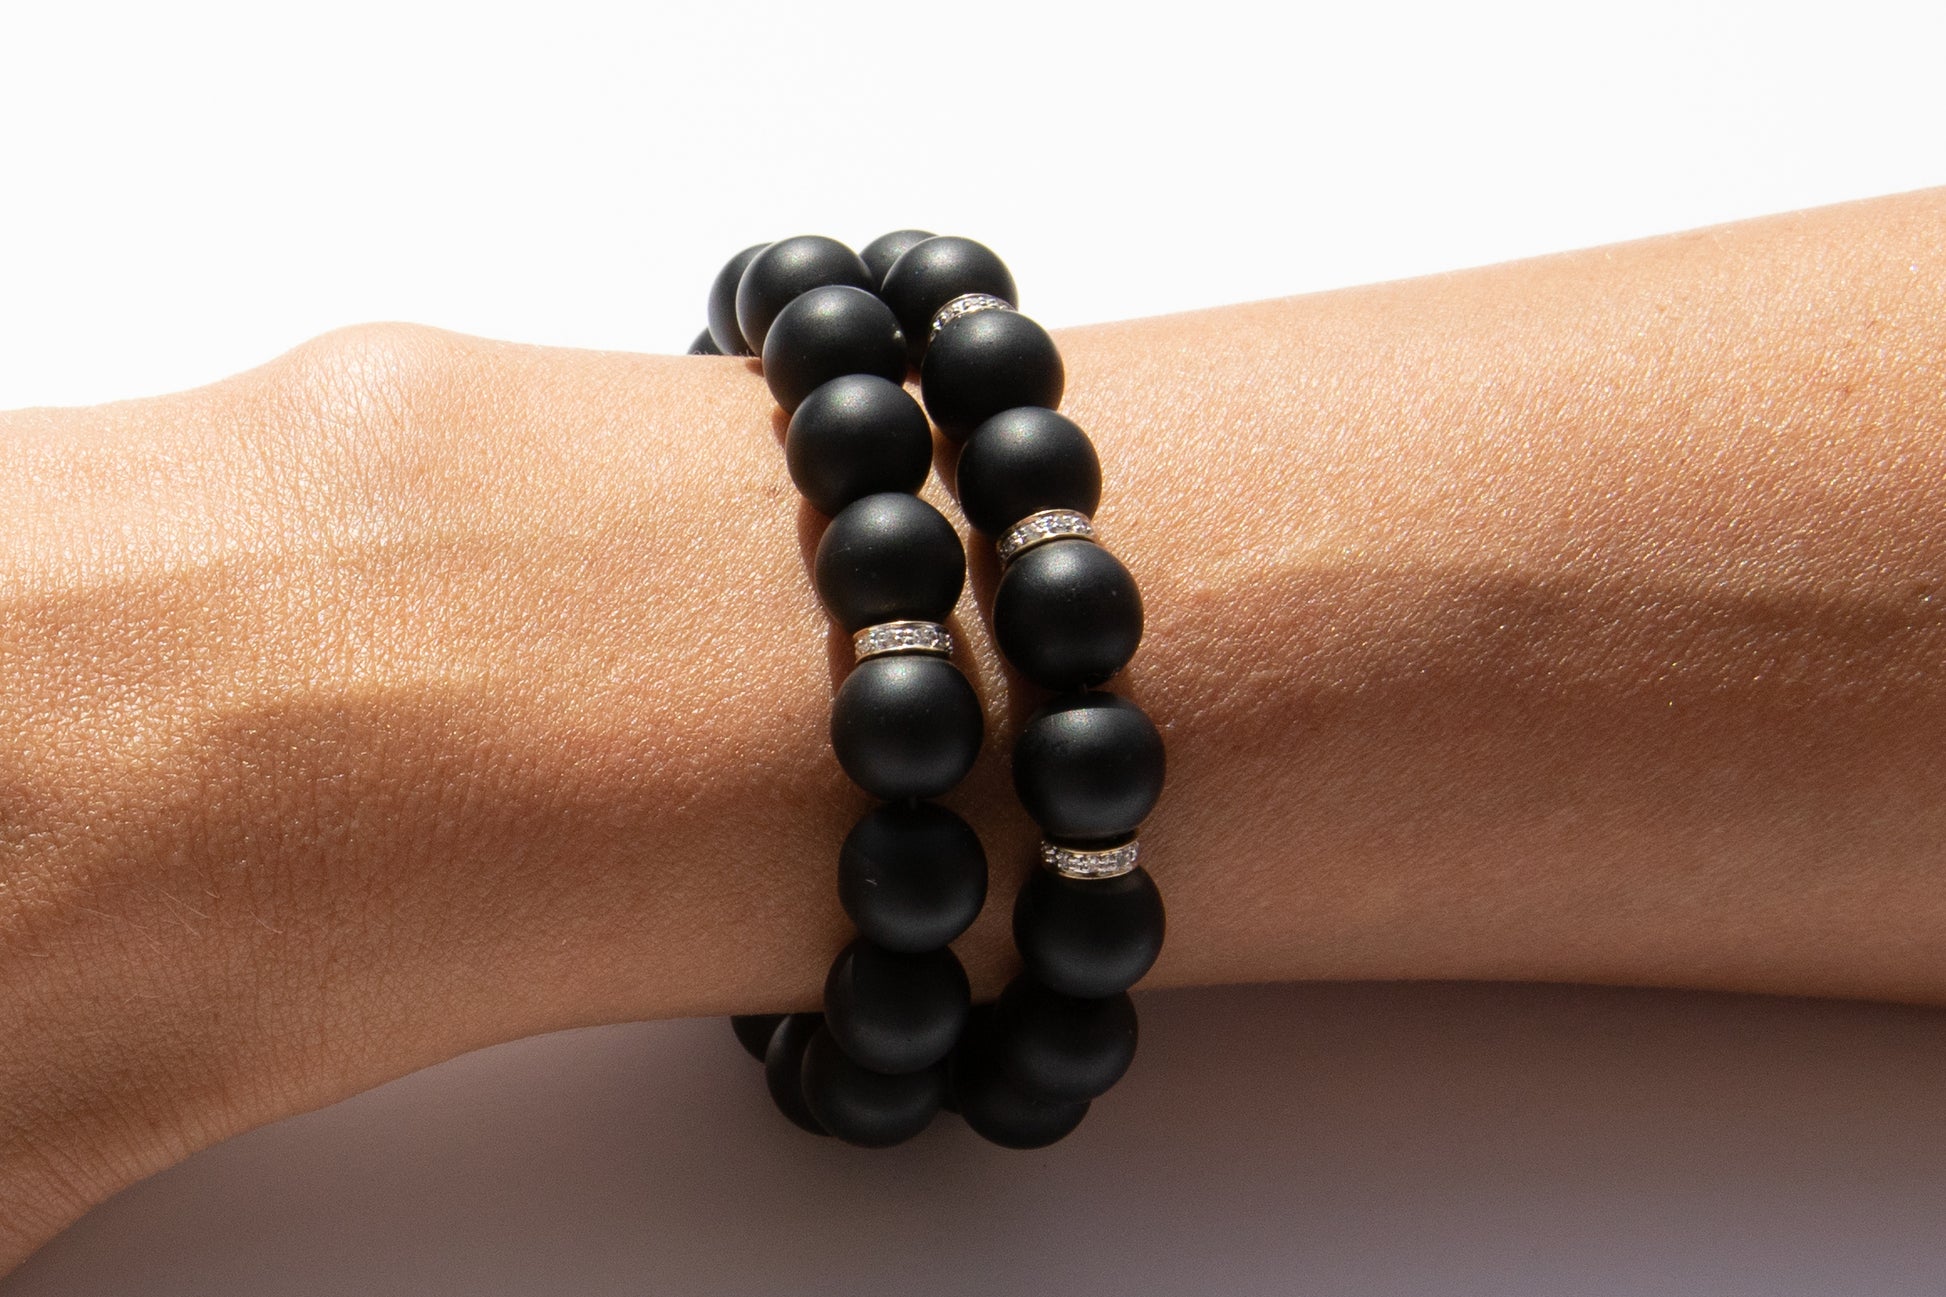 Set of Two Black Onyx Beaded Bracelet With Three Pavé Diamond Spacer Beads Set in 14k Gold Pictured On Arm